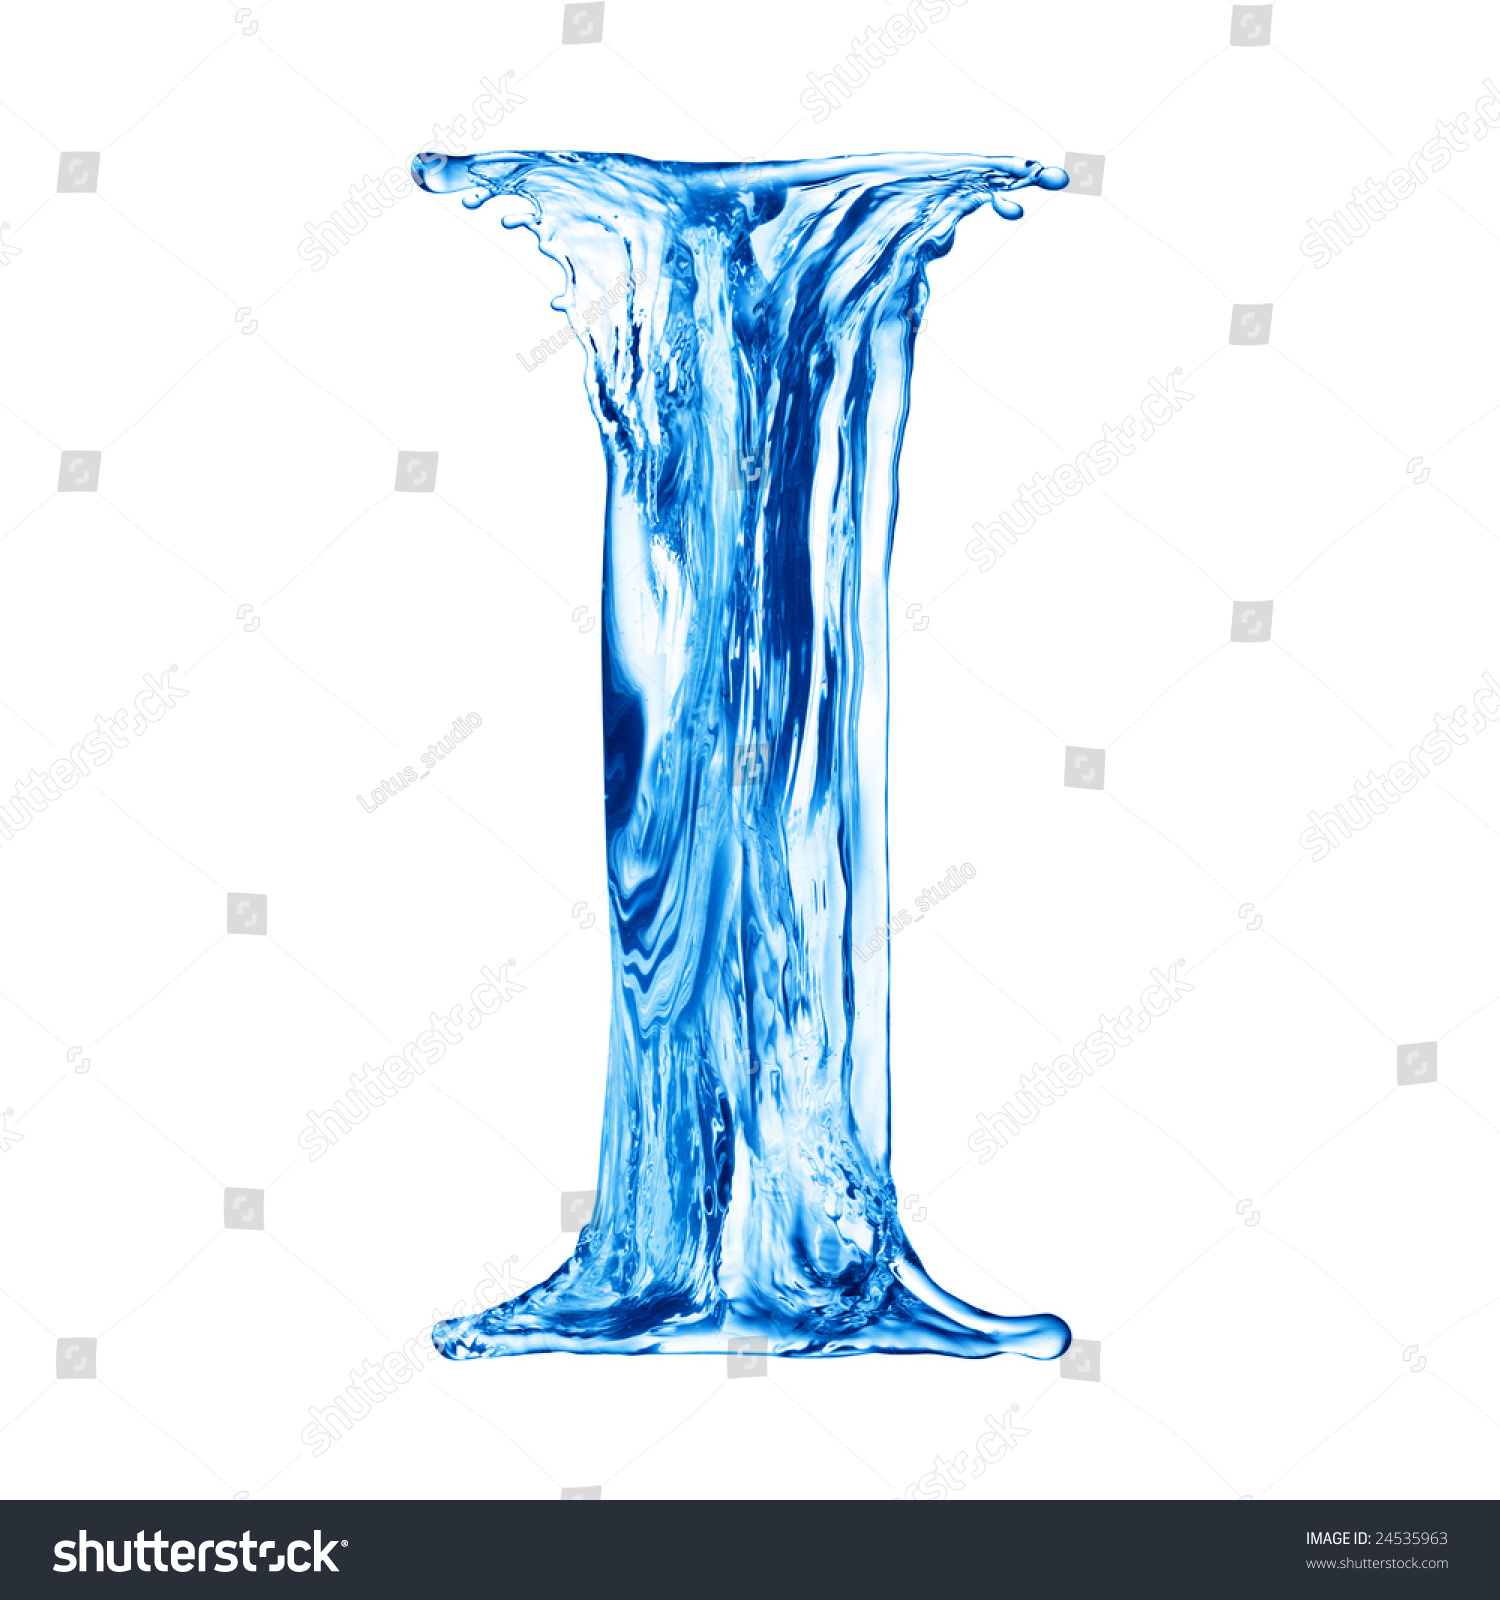 One Letter Of Water Alphabet Stock Photo 24535963 ...